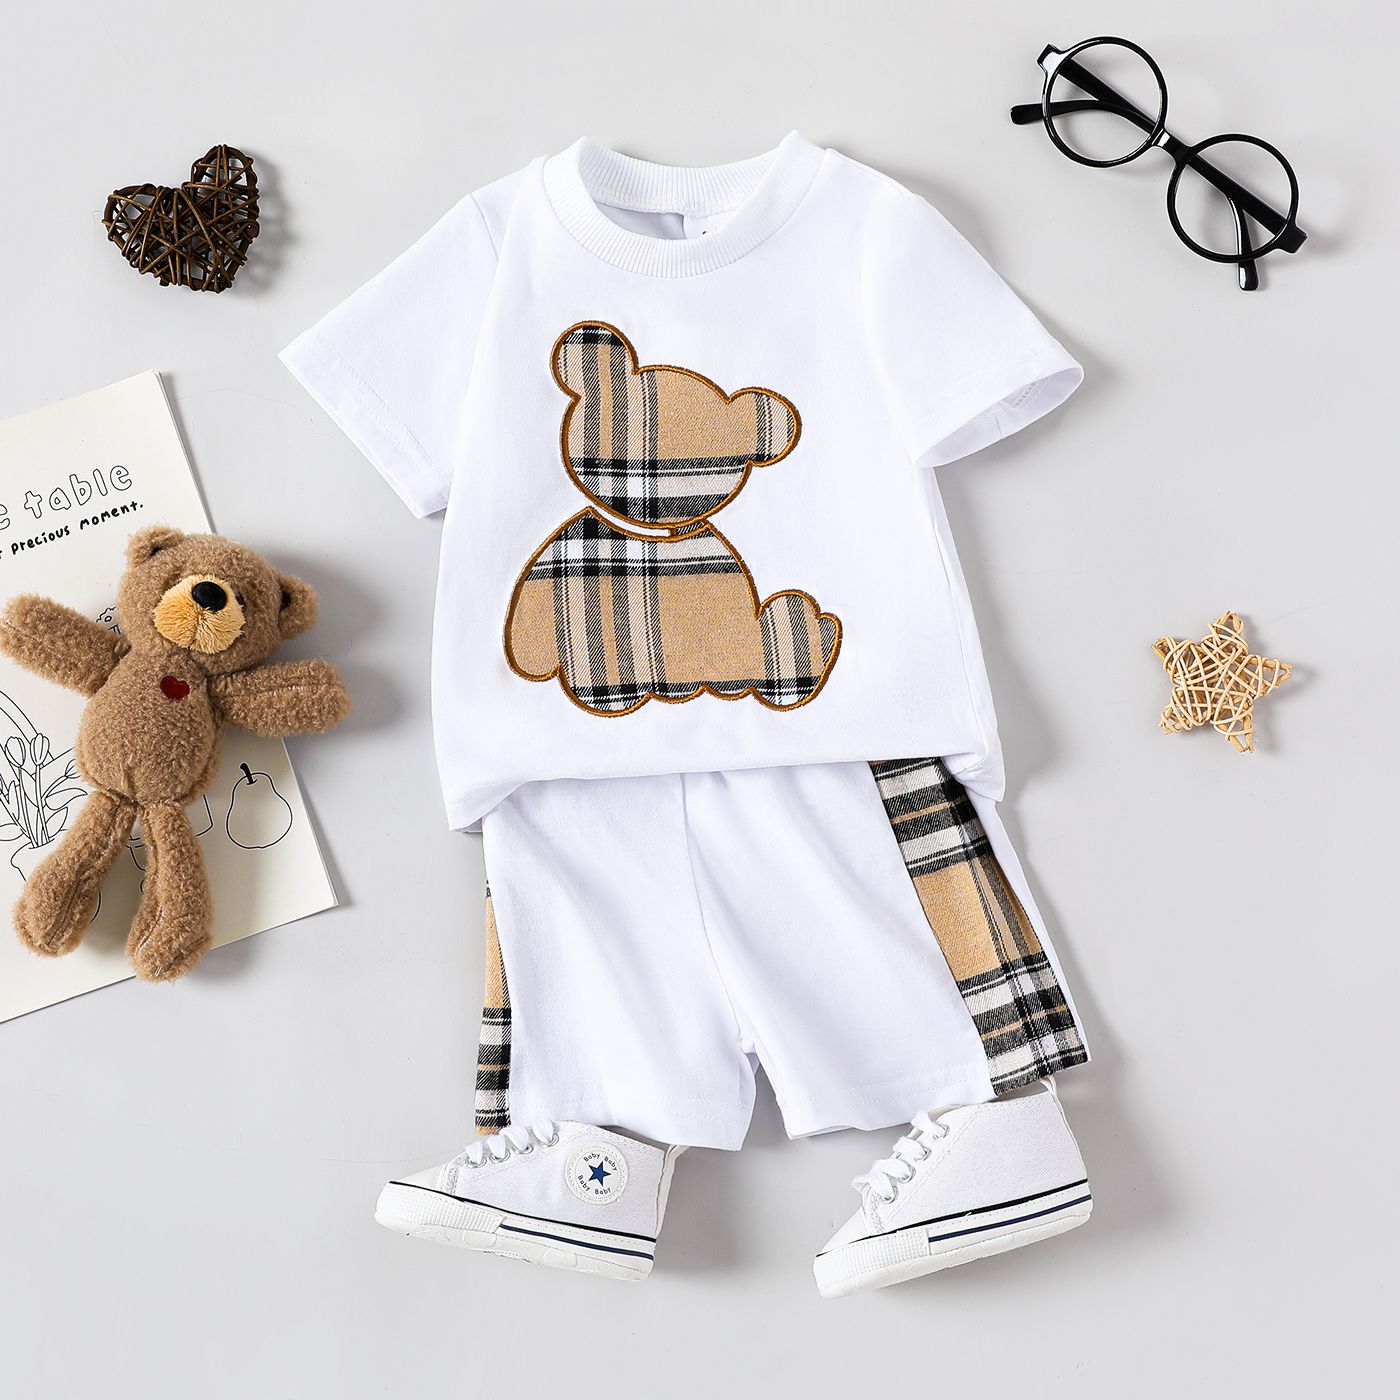 100% Cotton 2pcs Baby Boy Plaid Short-sleeve Romper and Cartoon Dog 3D Ears Overall Shorts Set